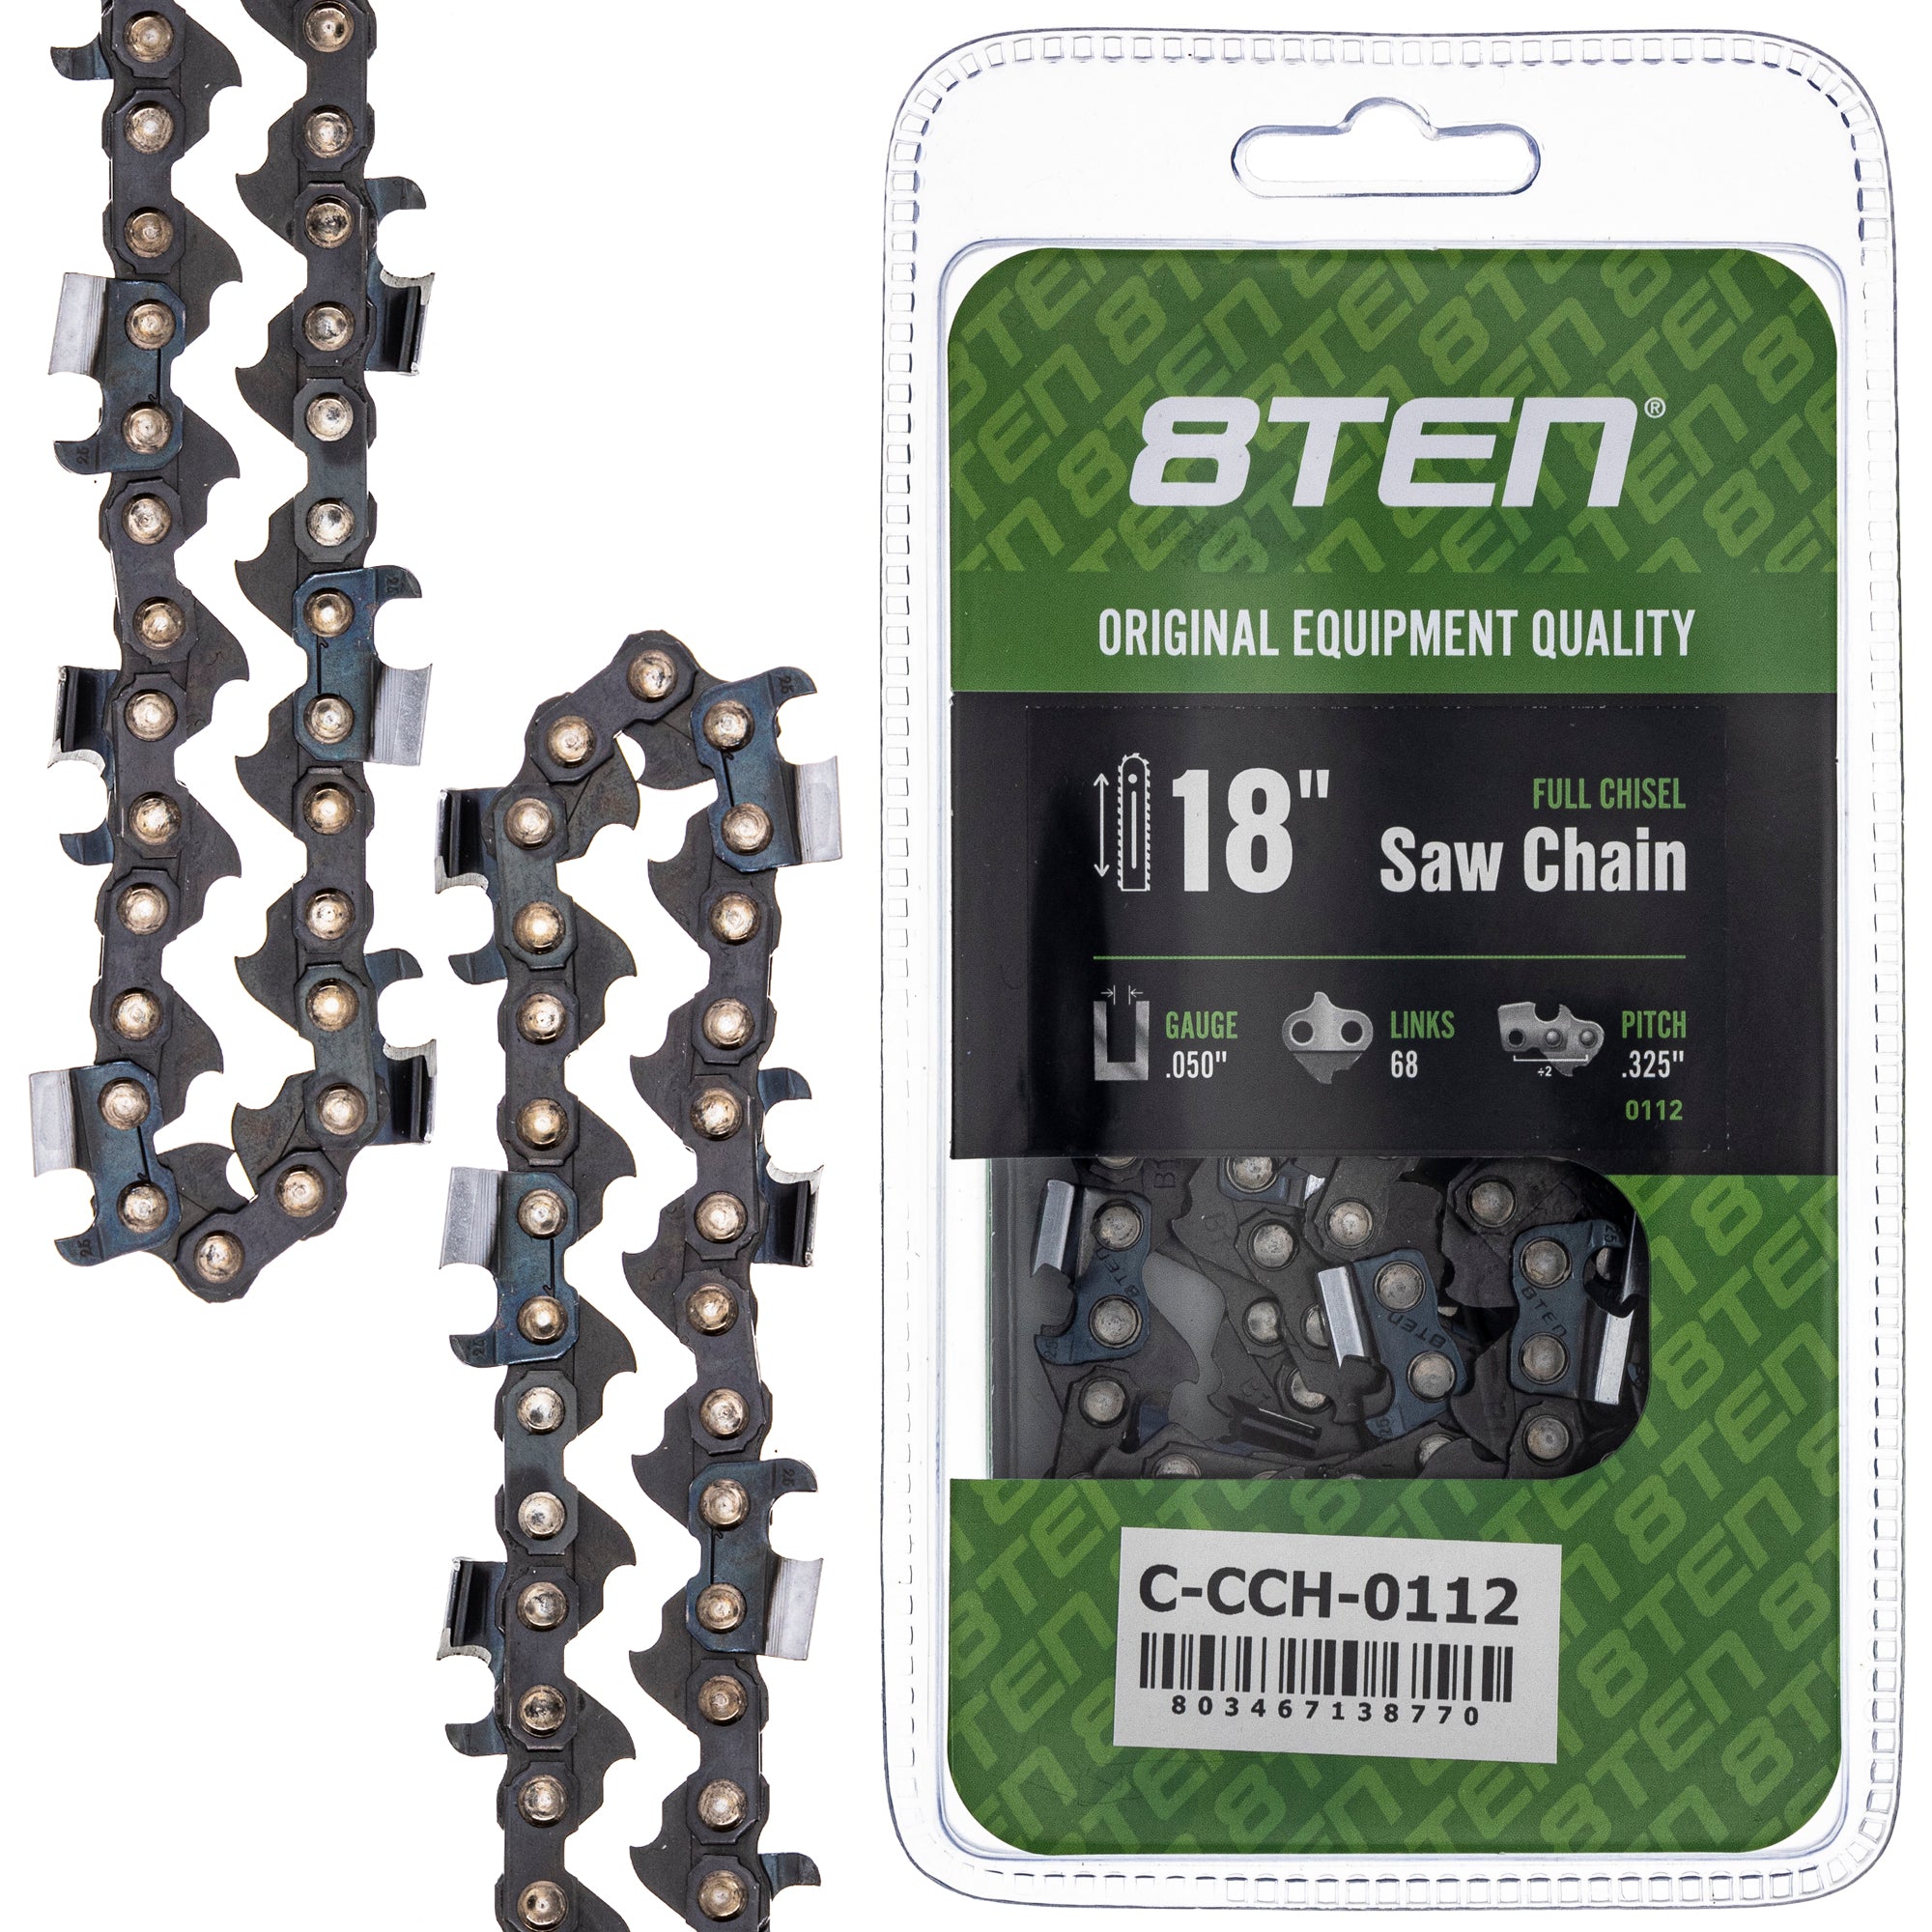 8TEN 810-CCC2334H Chain for zOTHER Oregon MS 25 070 025